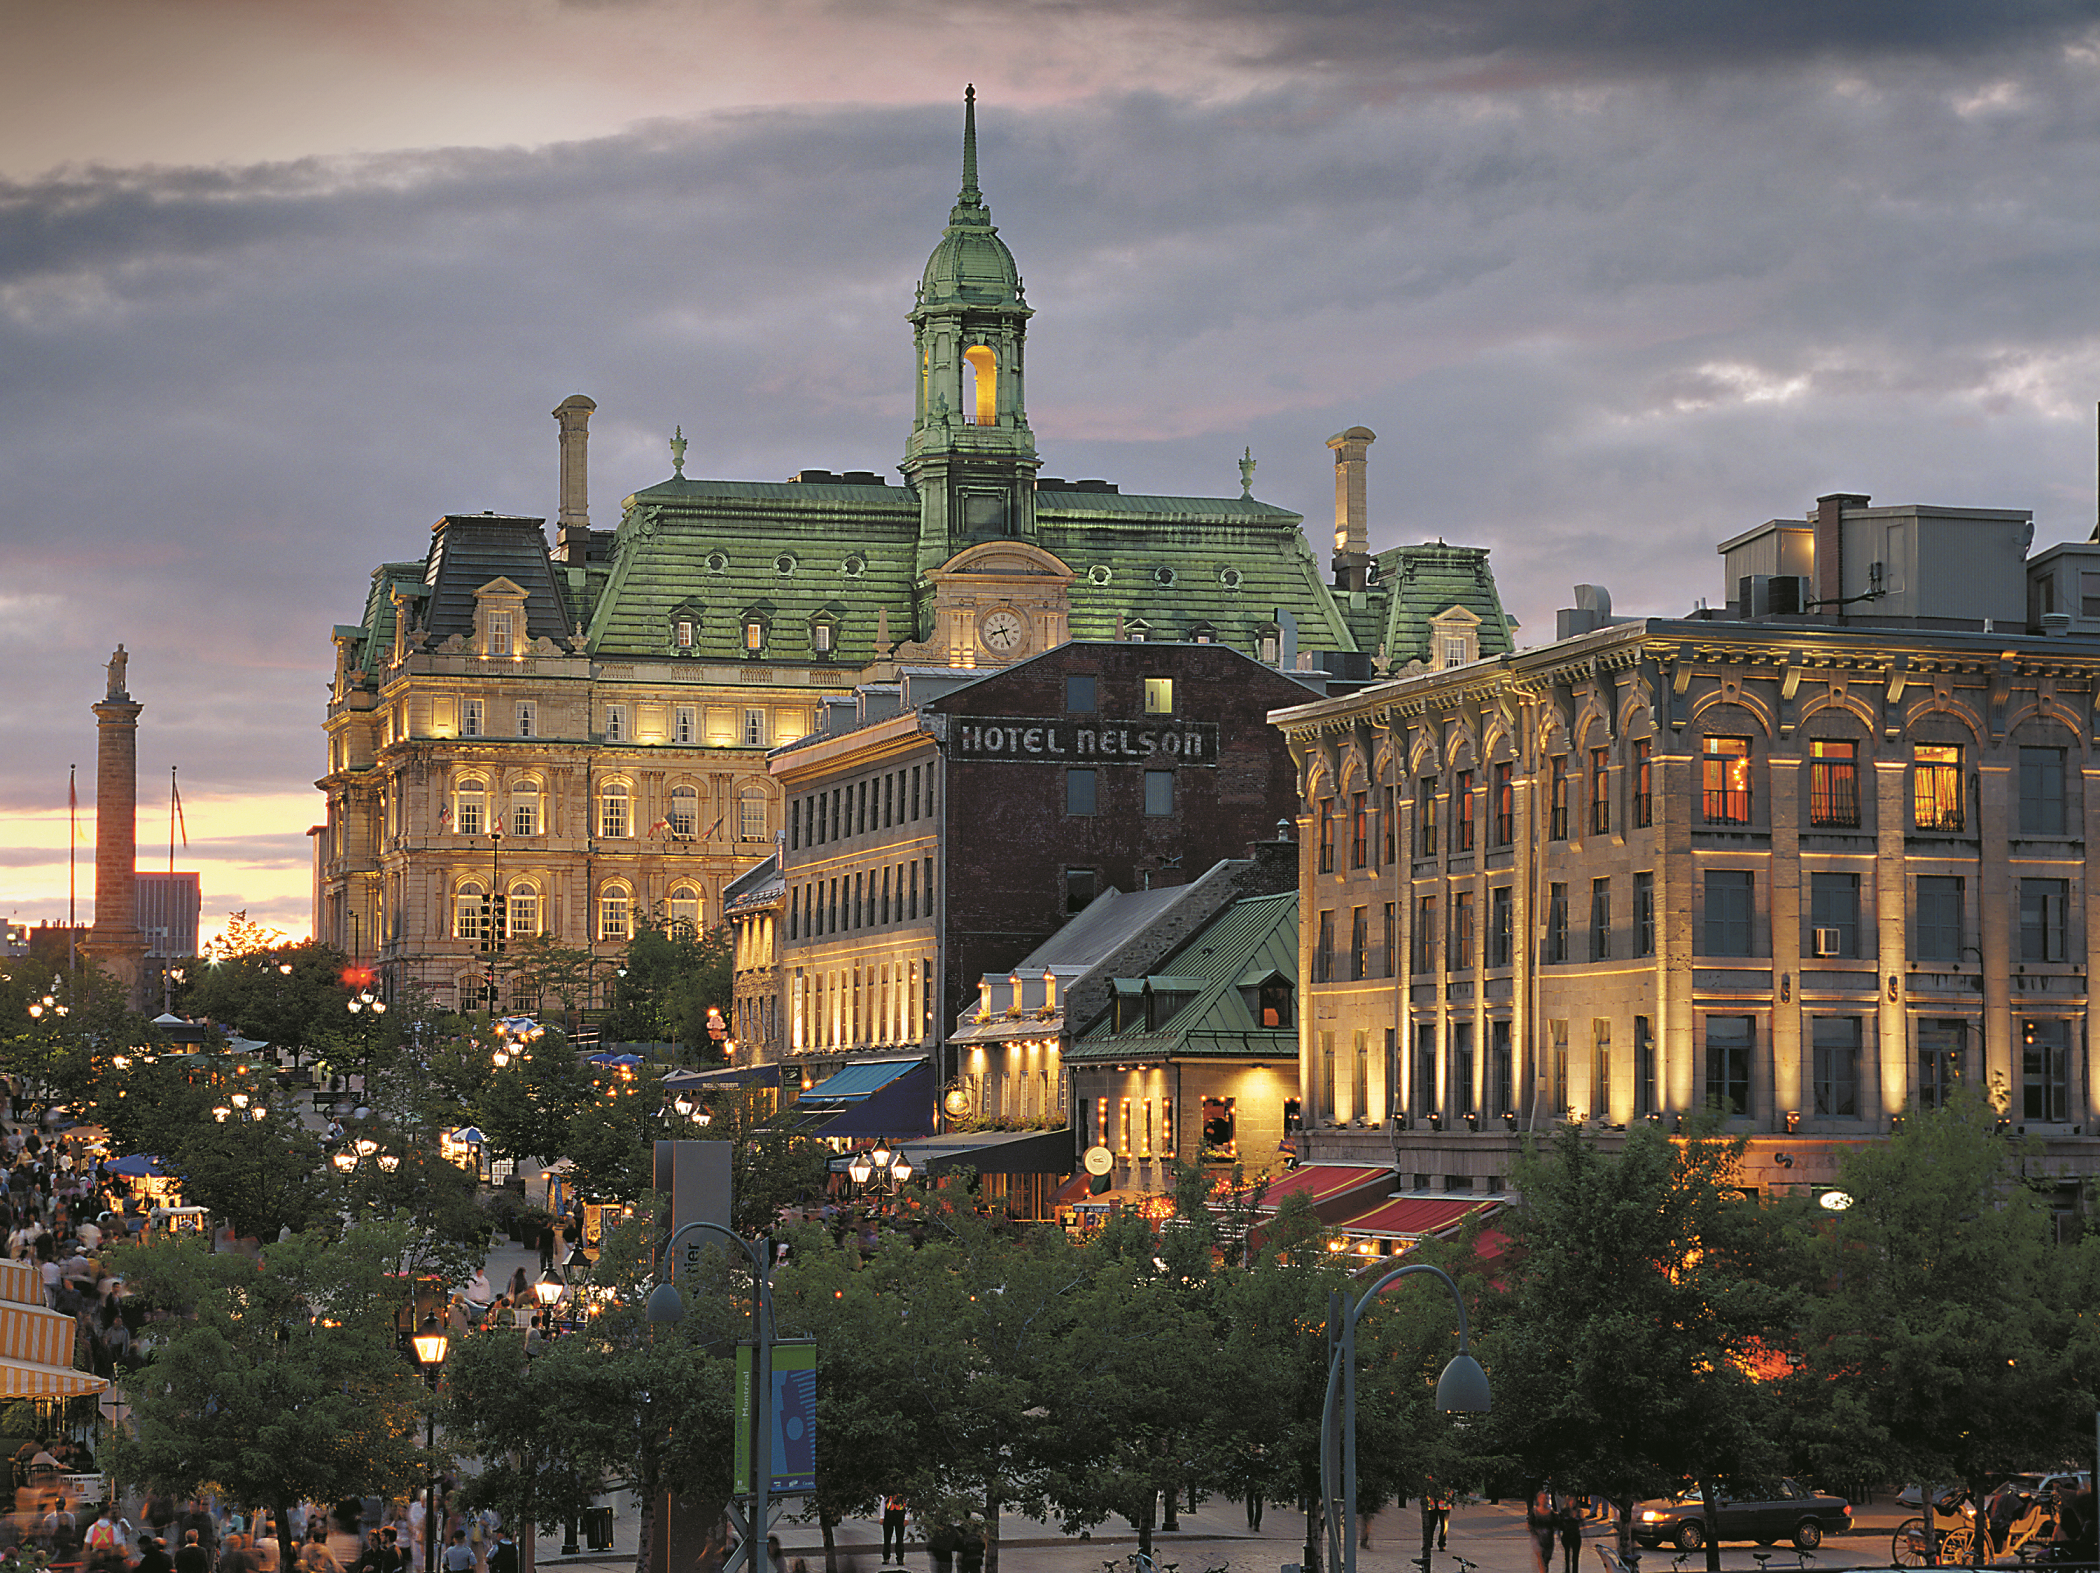 better to visit quebec city or montreal